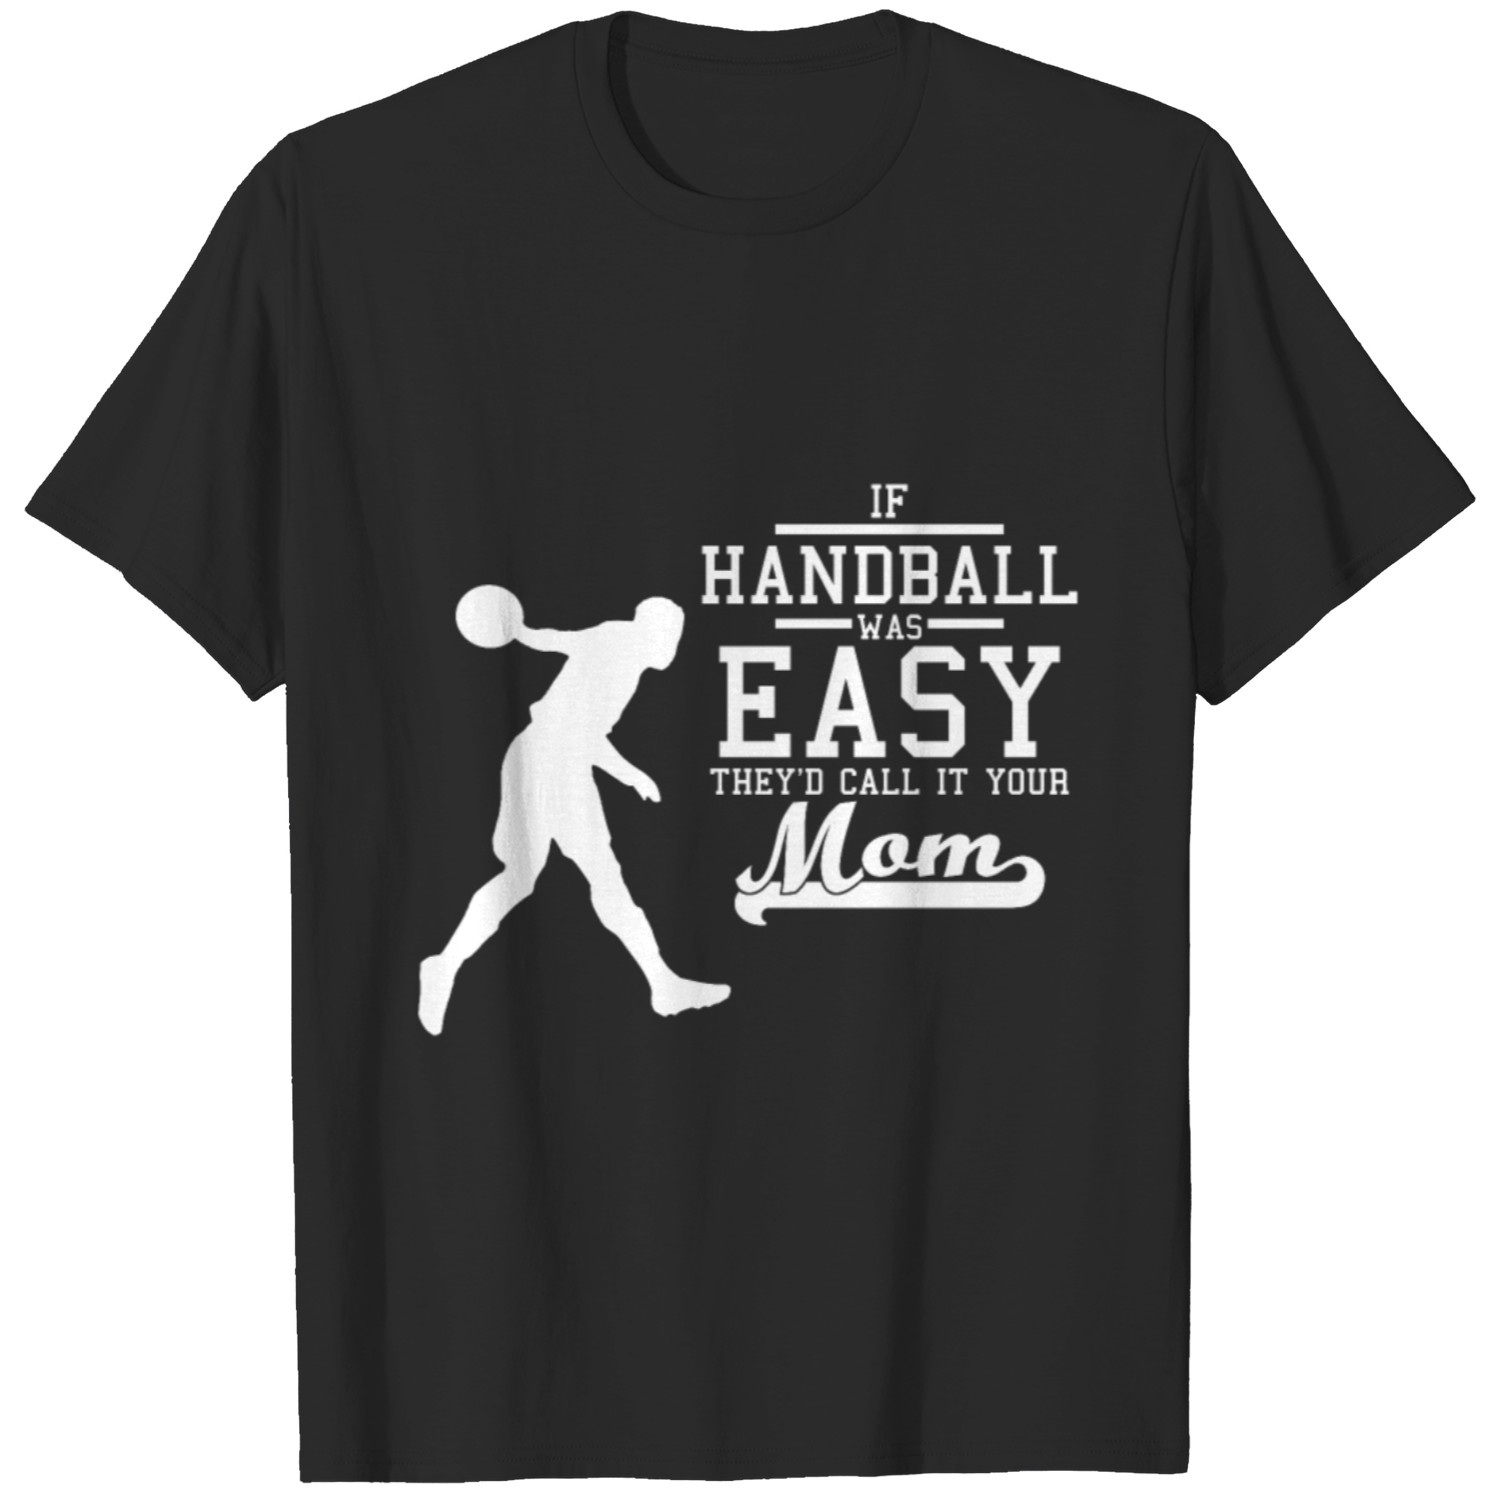 If Handball was easy they'd call it your mom T-shirt